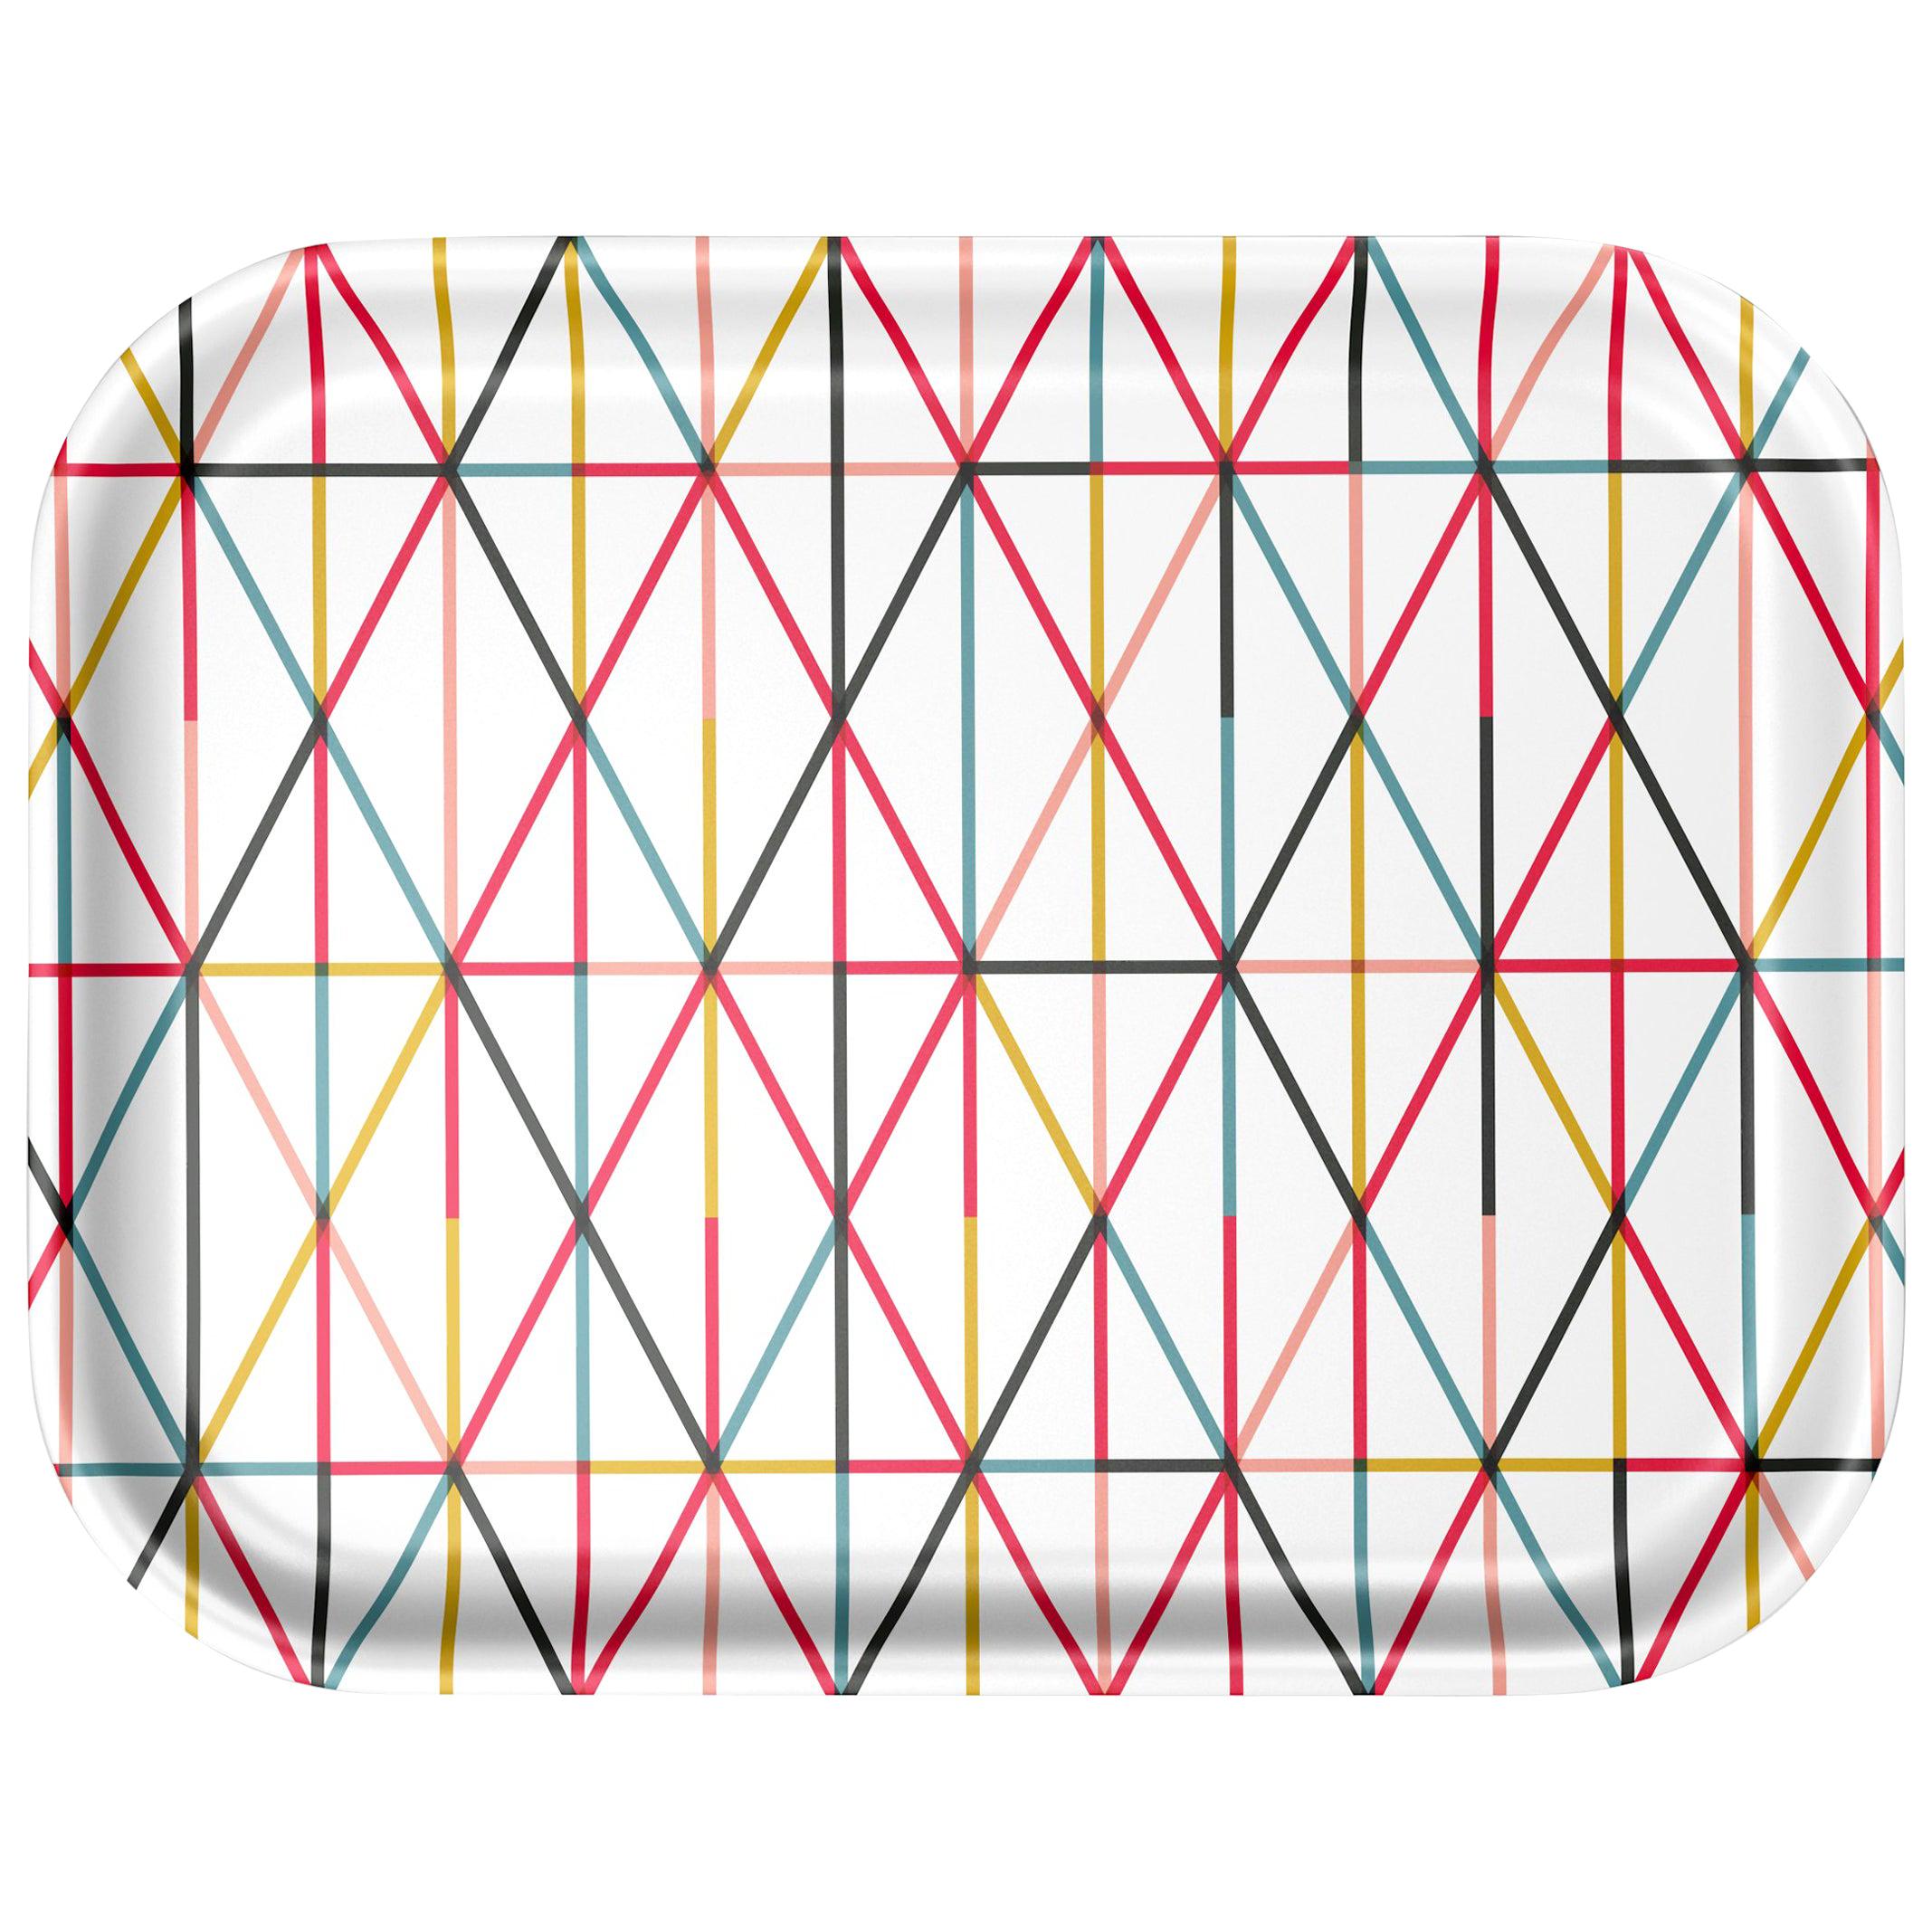 Vitra Medium Classic Tray Grid in Multicolor Grid by Alexander Girard For Sale